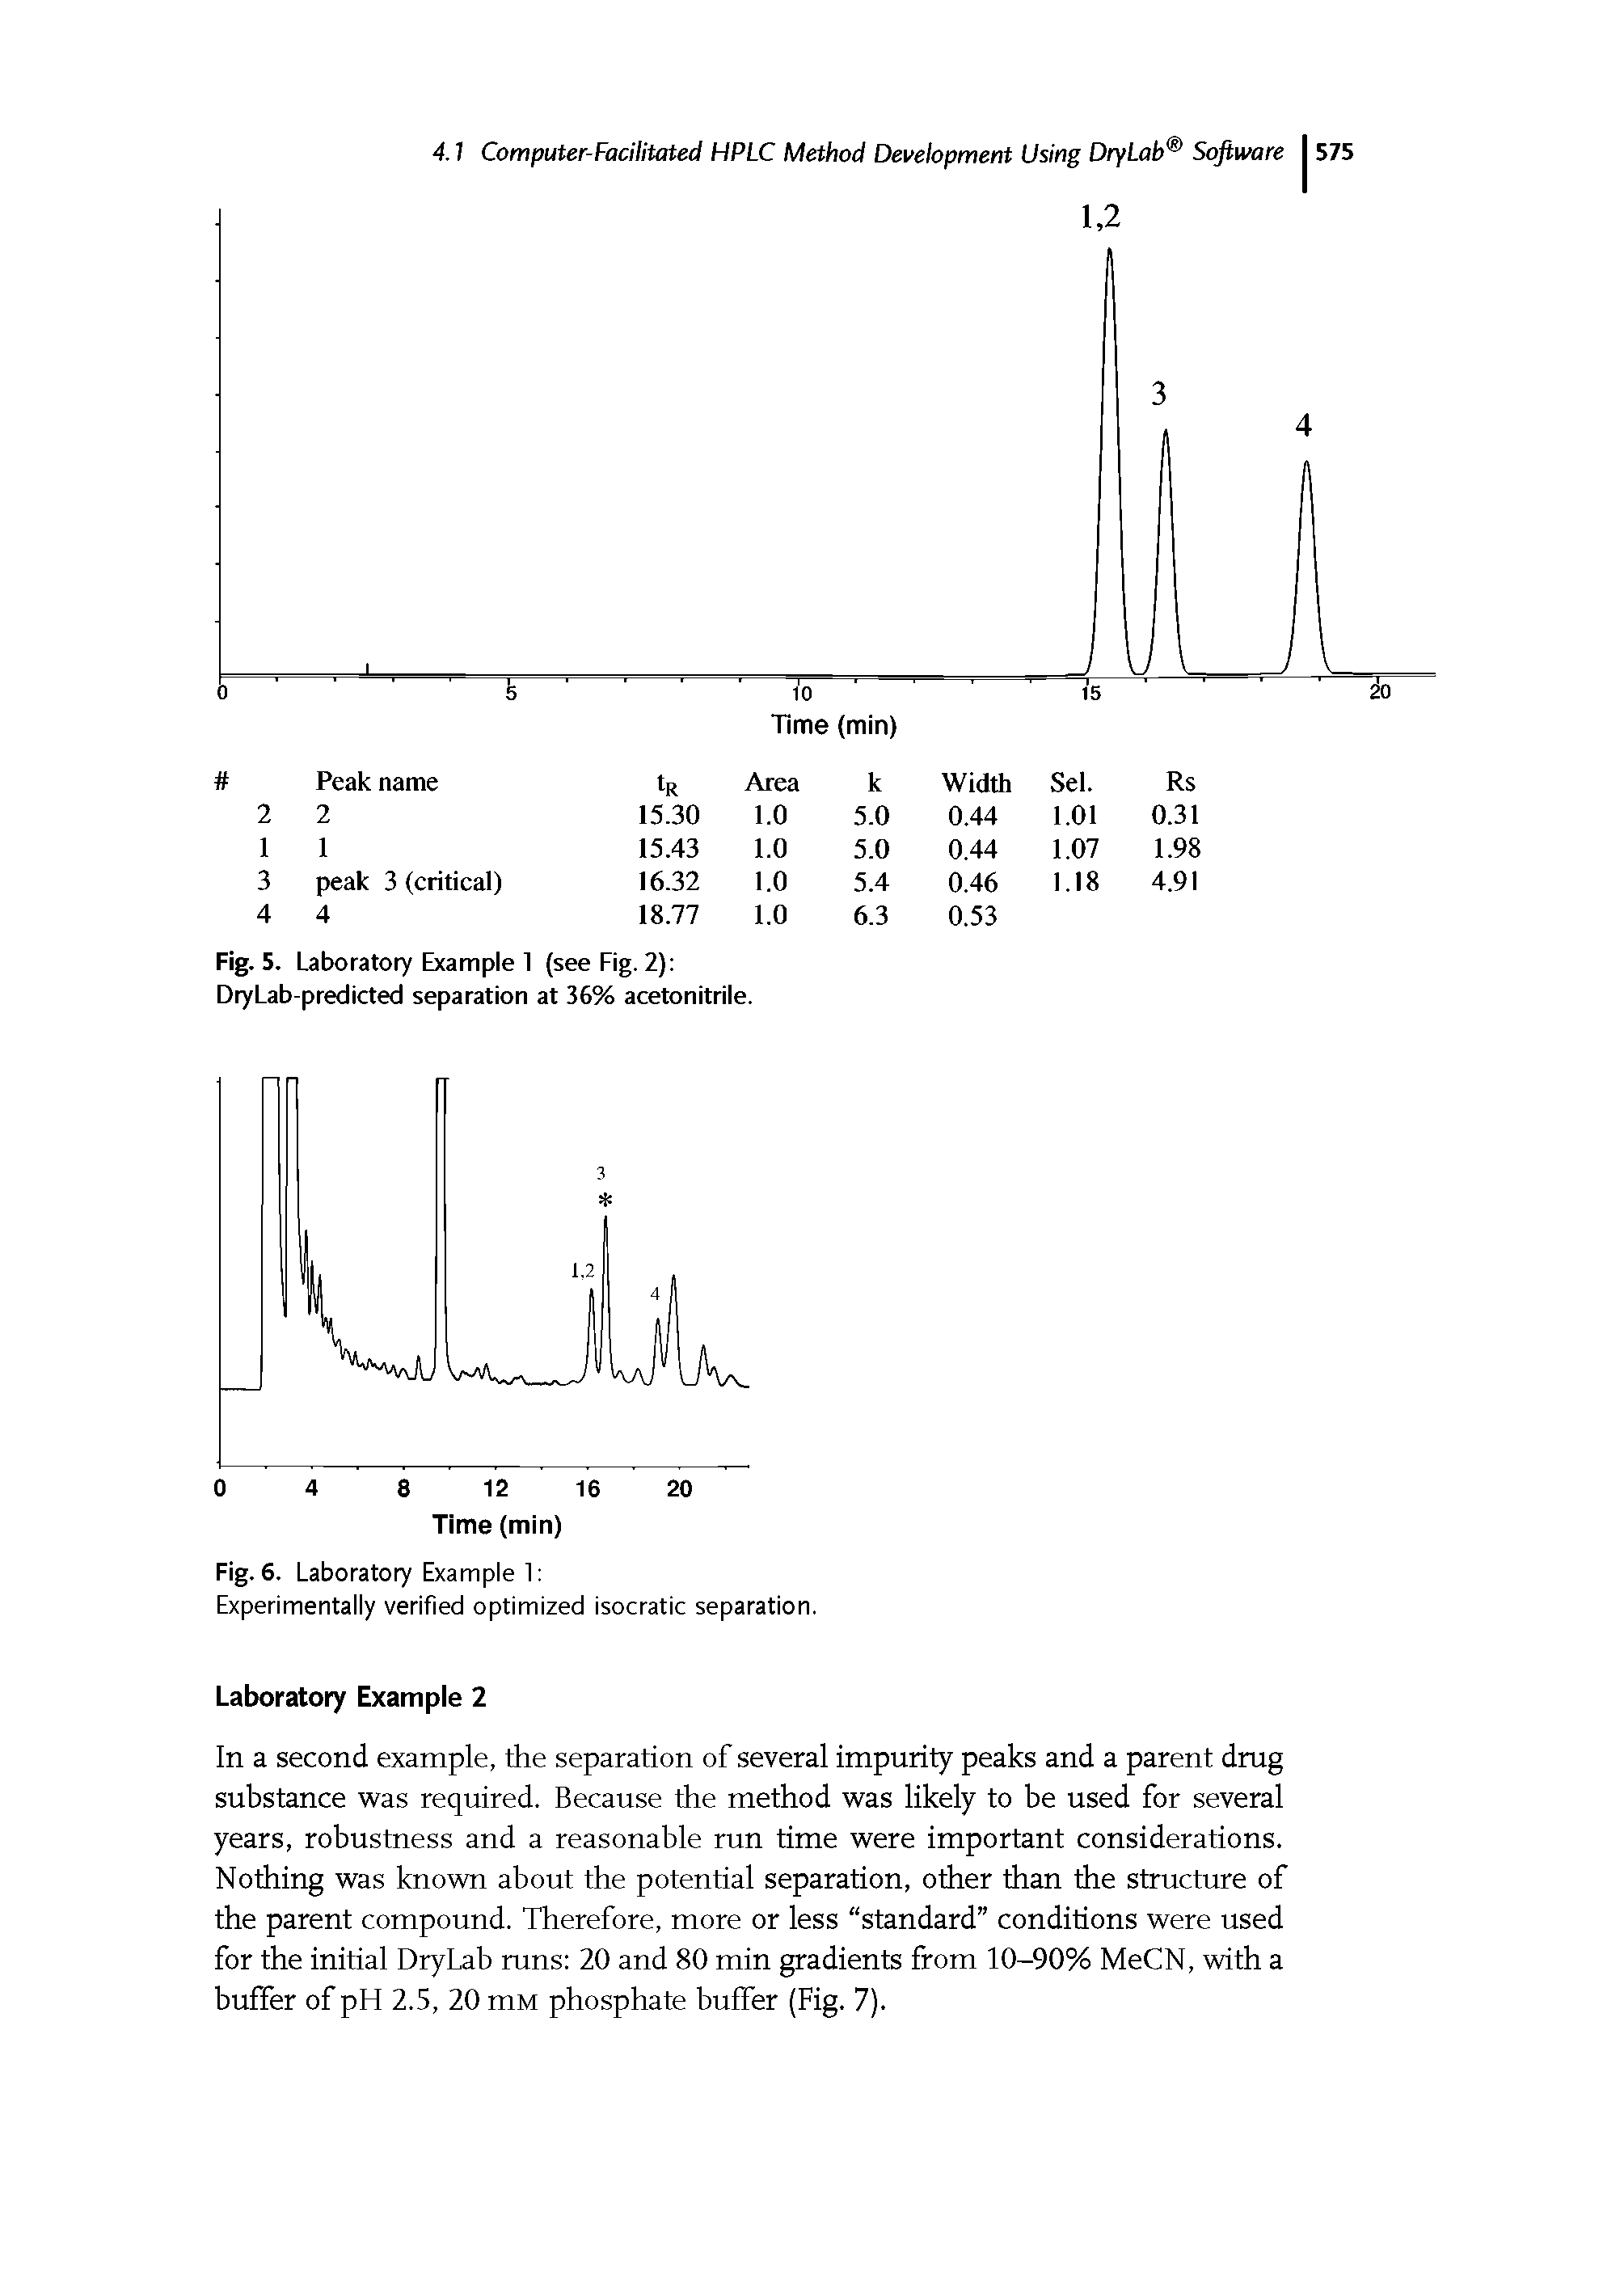 Fig. 5. Laboratory Example 1 (see Fig. 2) DryLab-predicted separation at 36% acetonitrile.